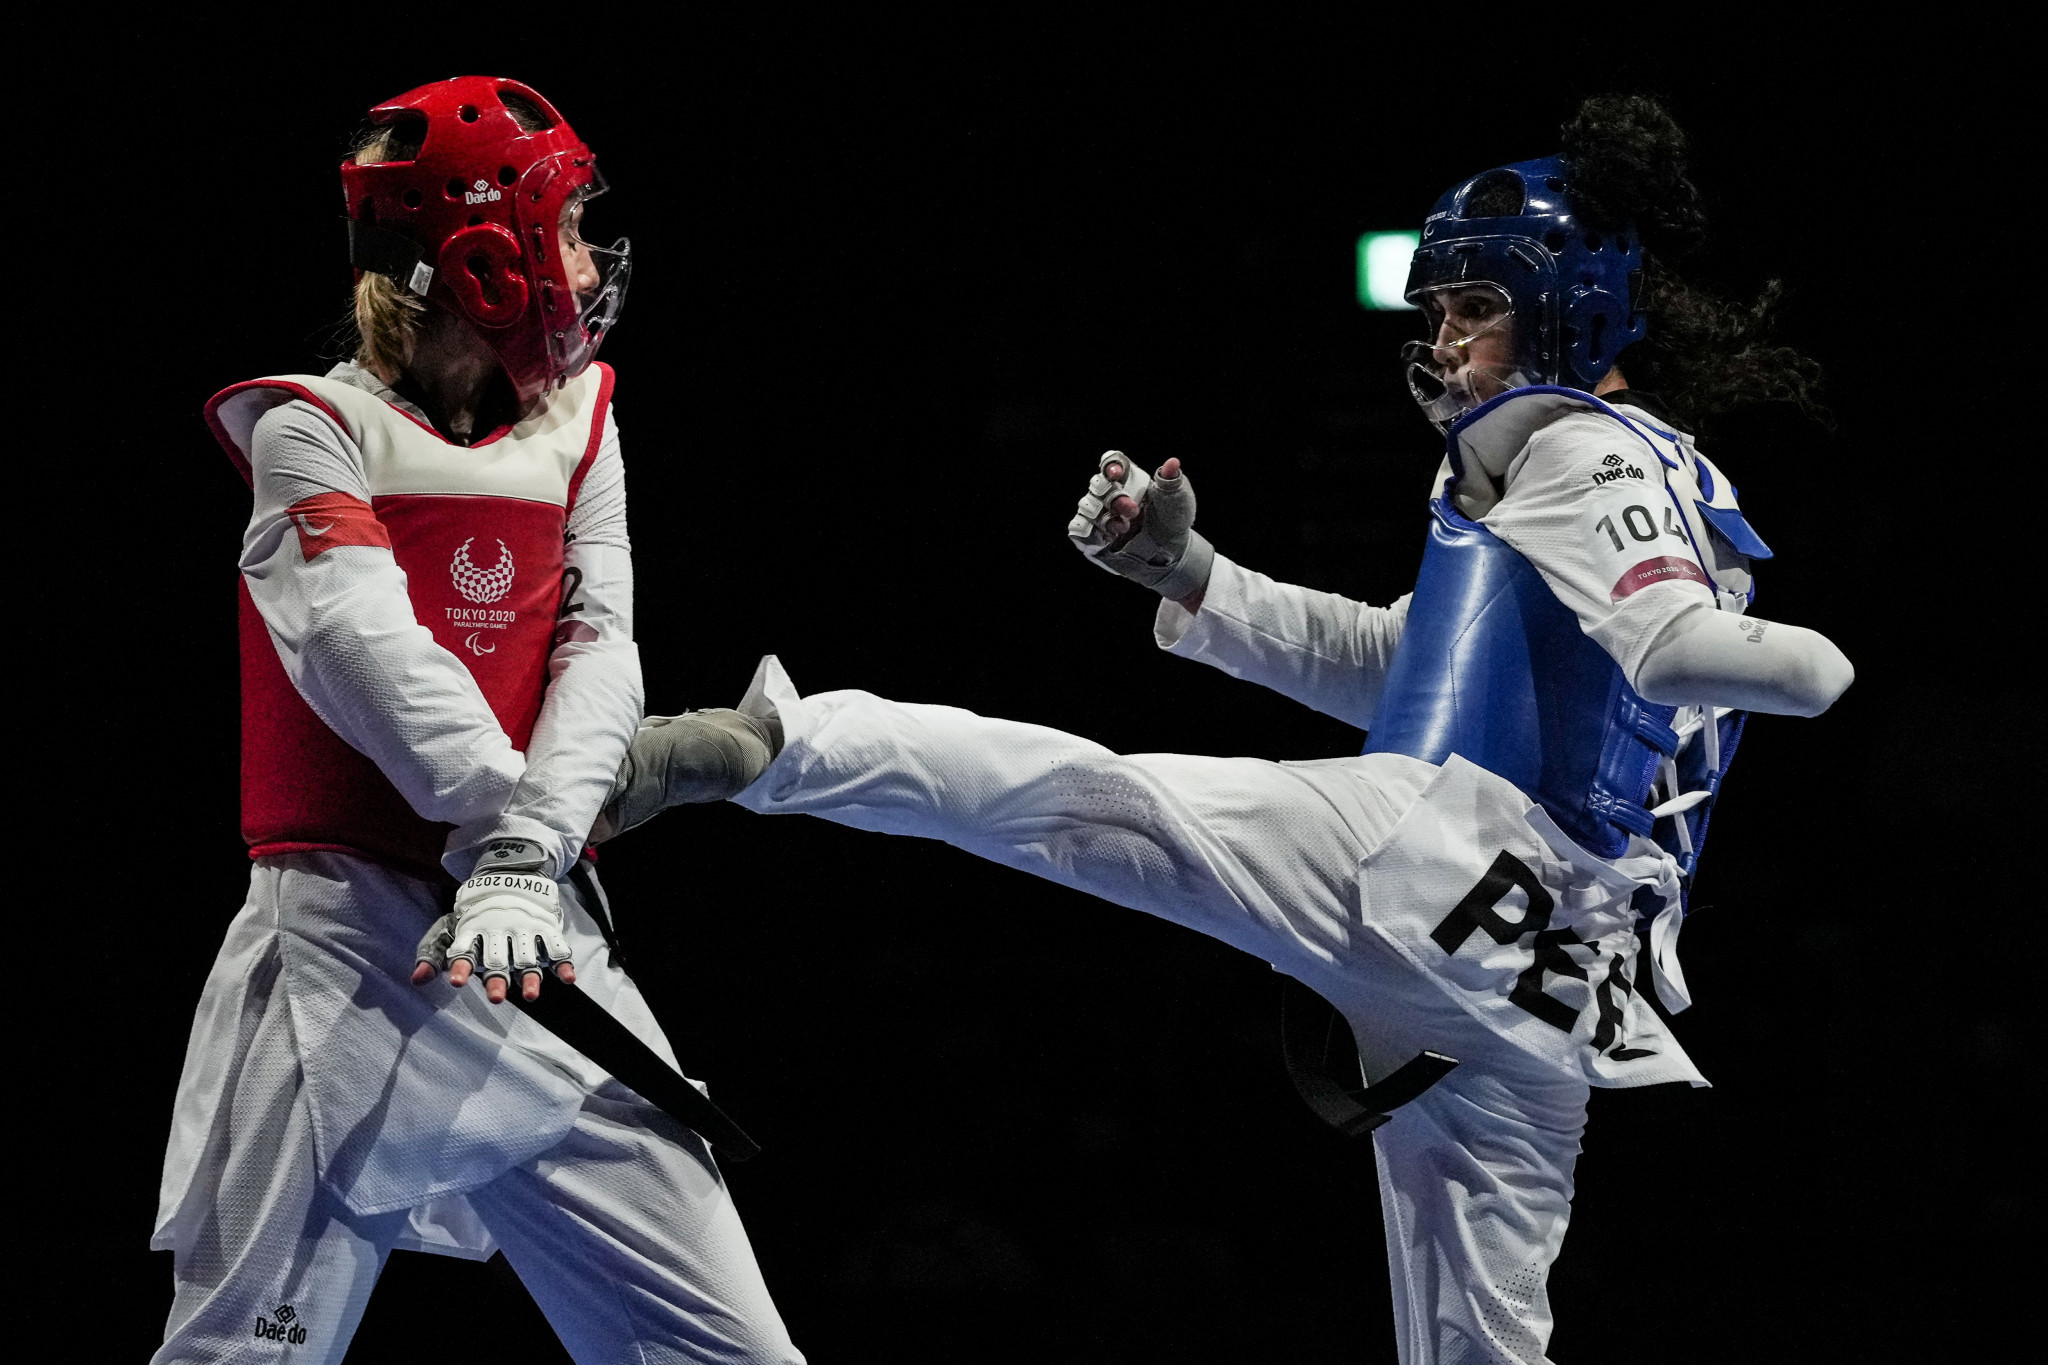 Meryem Cavdar, left, is bidding to become an undisputed champion but Paralympic gold medallist Leonor Angelica Espinoza, right, is returning to action  ©Getty Images